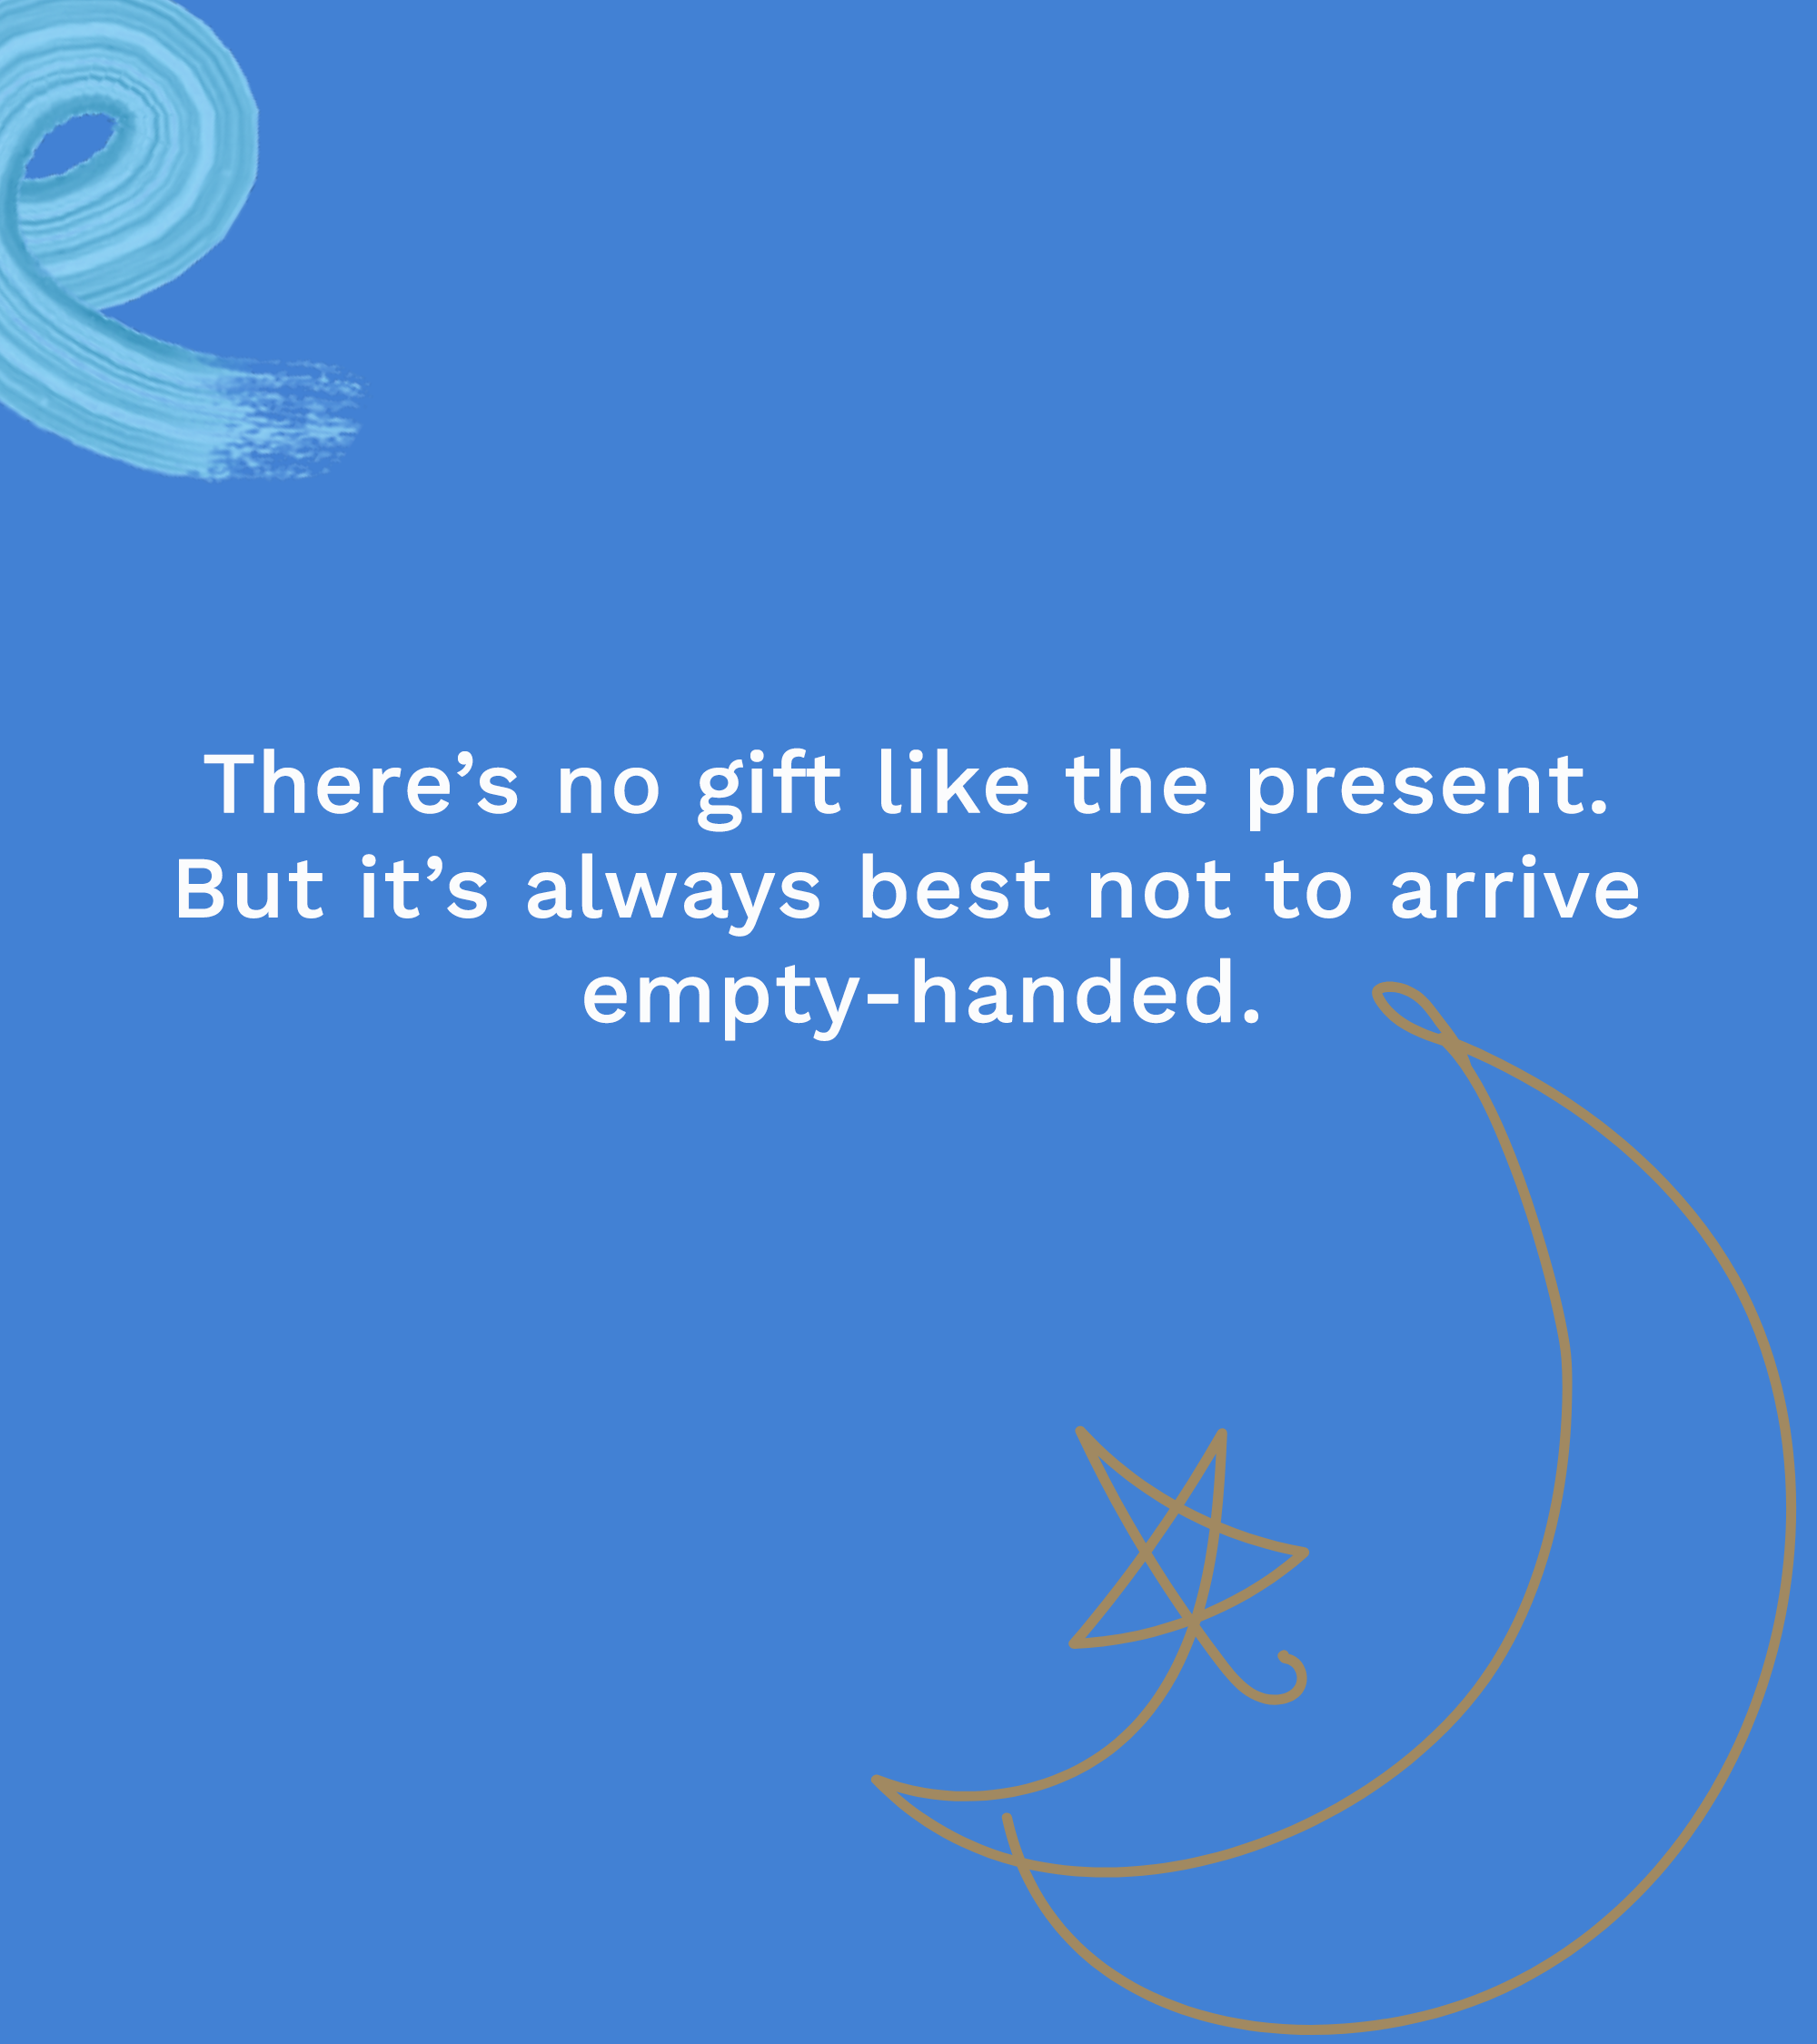 There is no gift like the present. But it's always best not to arrive empty-handed.